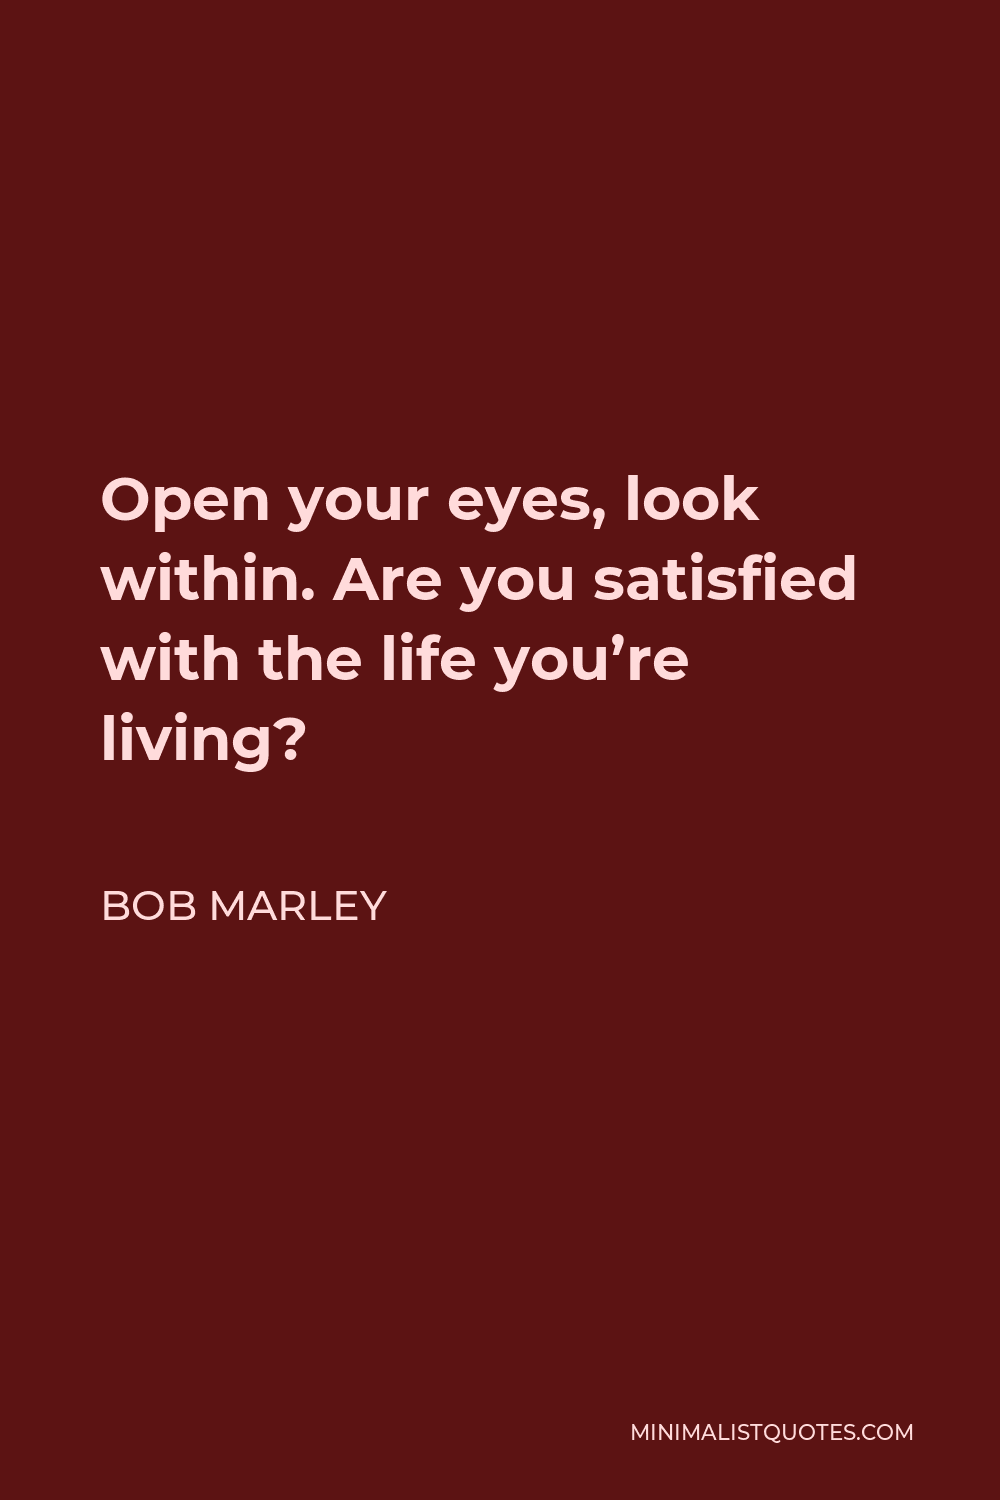 Bob Marley Quote - Open your eyes, look within. Are you satisfied with the life you’re living?